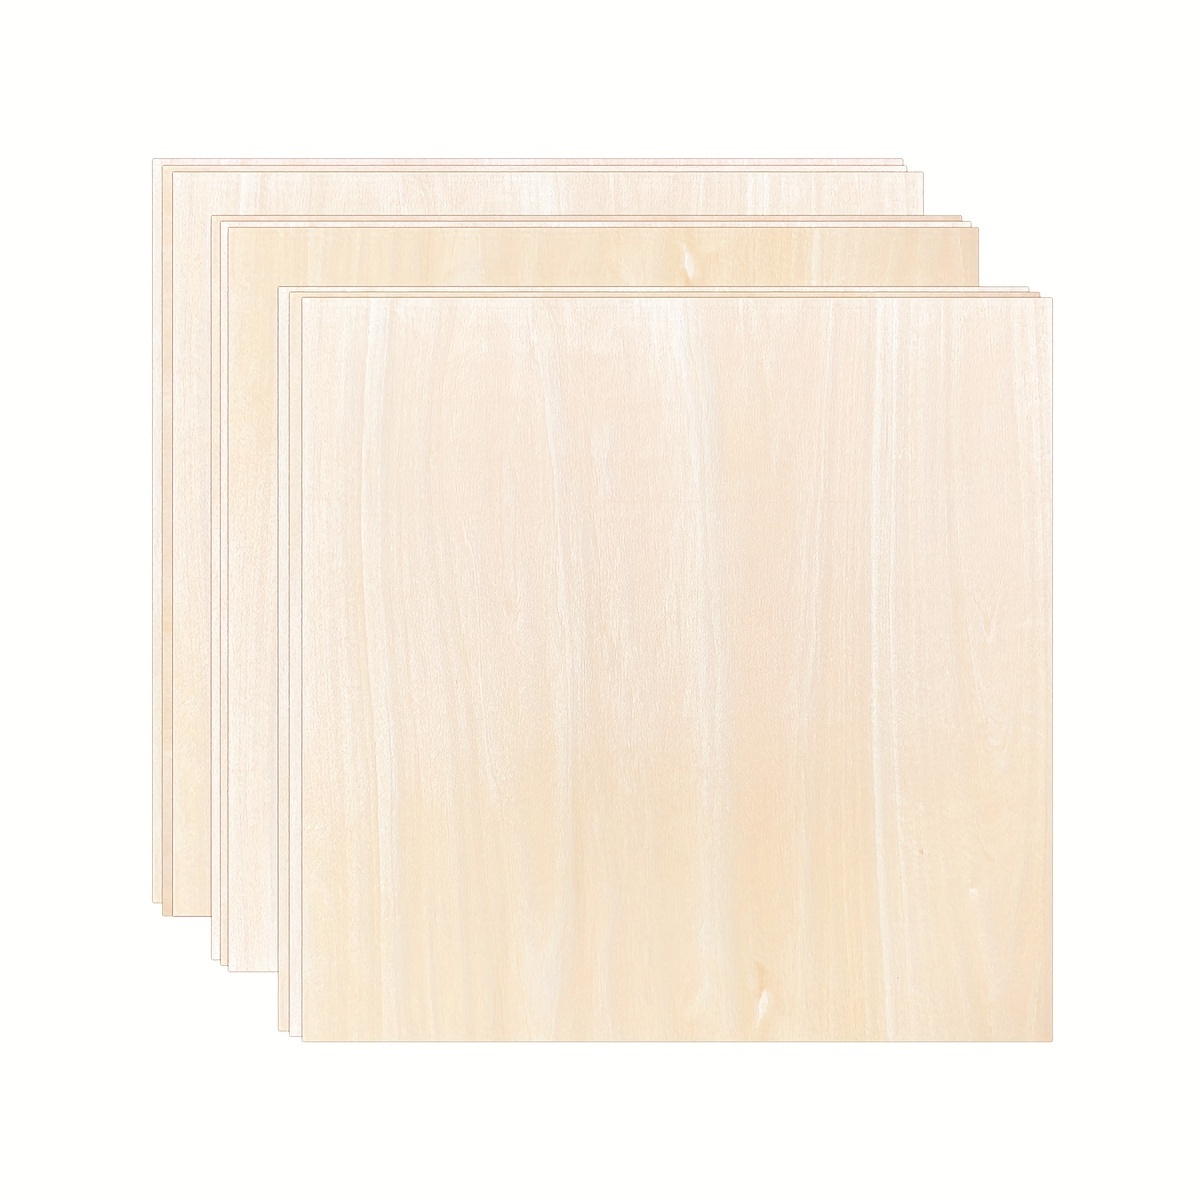 Wood, 15 Pack Wood Sheets, Basswood Thin Craft Wood Board For House  Aircraft Ship Boat Arts And Crafts, School Projects, Wooden DIY Ornaments  (150x100